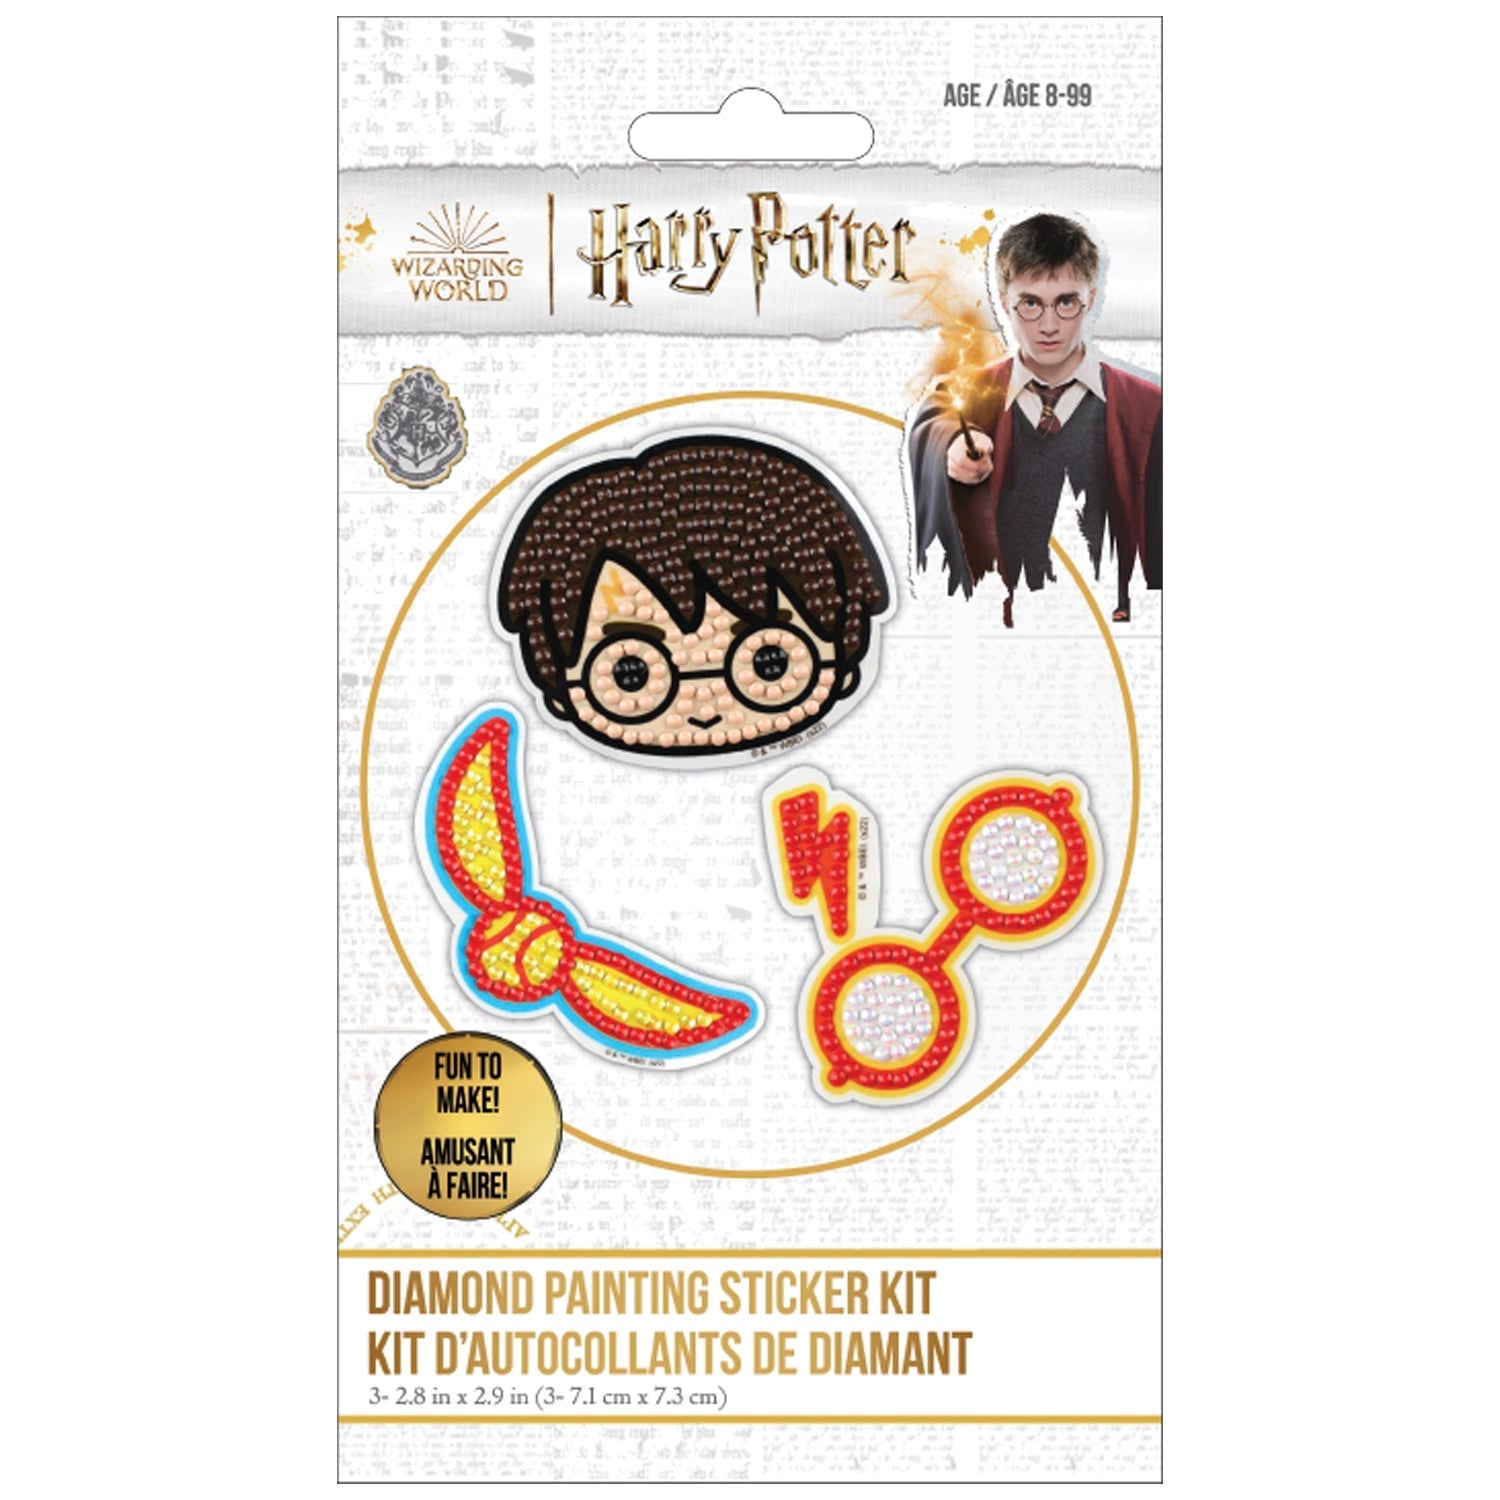 LEGO DOTS Hogwarts Accessories Pack 41808, Harry Potter Themed Jewelry  Making Kit with Bracelet, 2 Bag Tags and Stich-on Patch, DIY Craft Toy Set  for Kids 